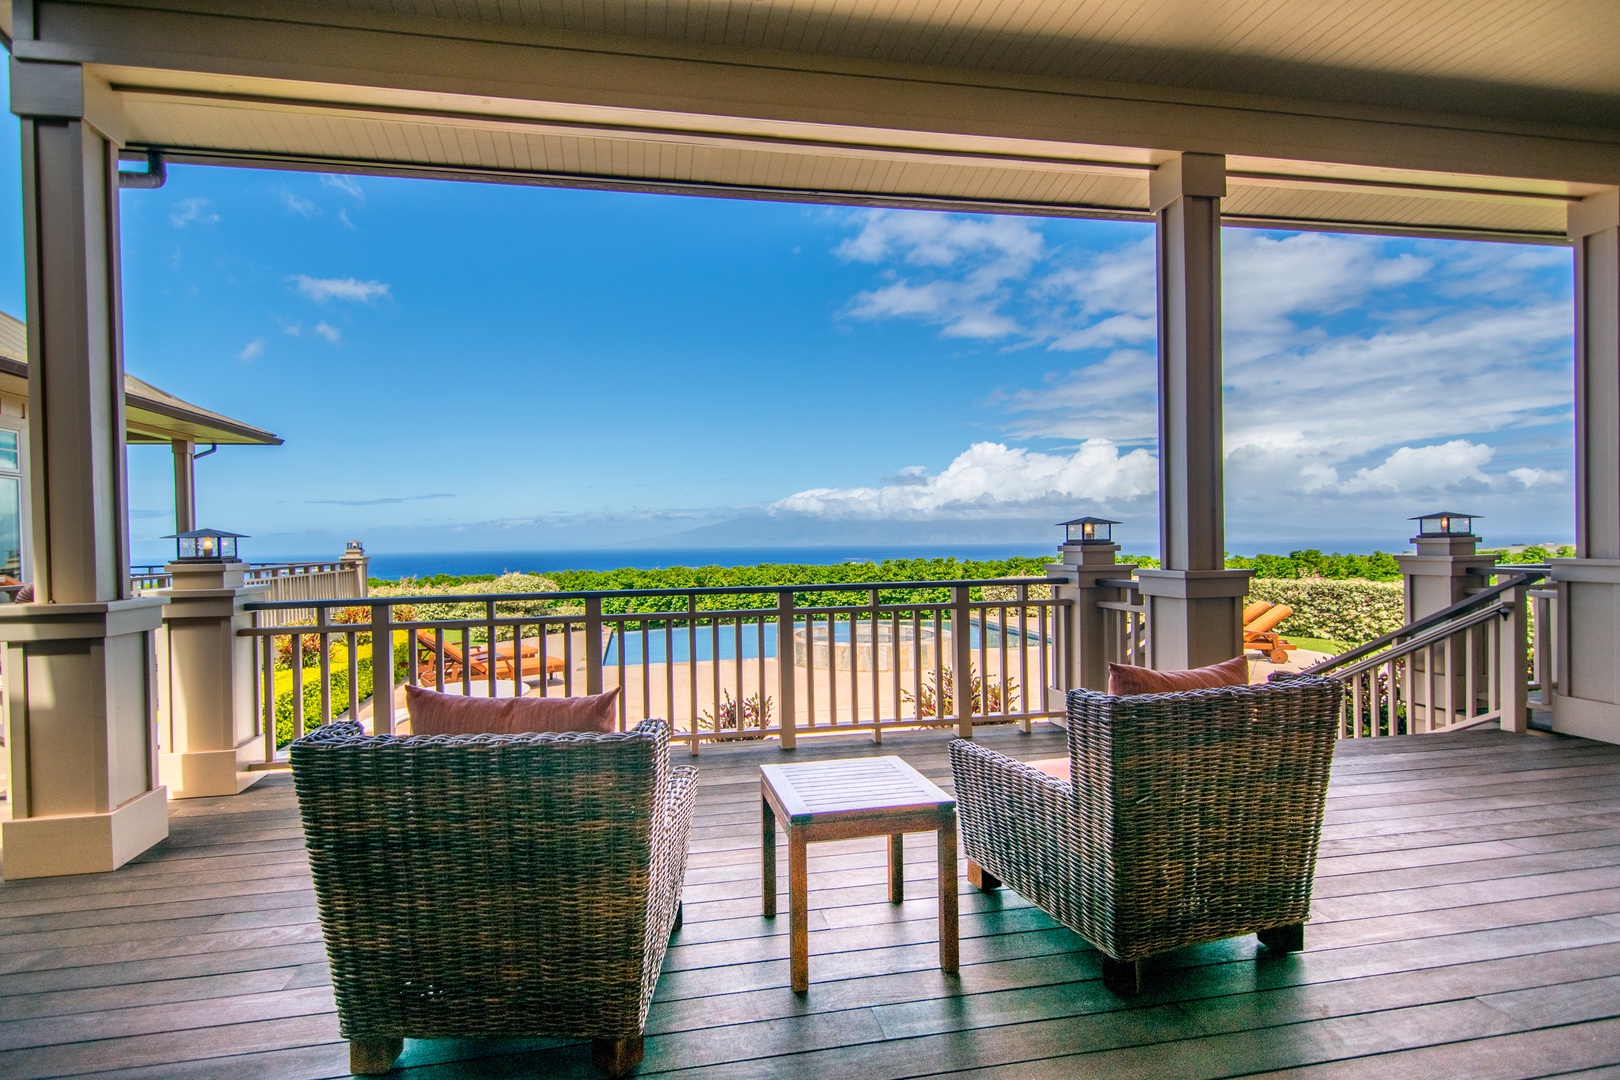 Lahaina Vacation Rentals, Rainbow Hale Estate* - Relax and Unwind While you Take in the Views